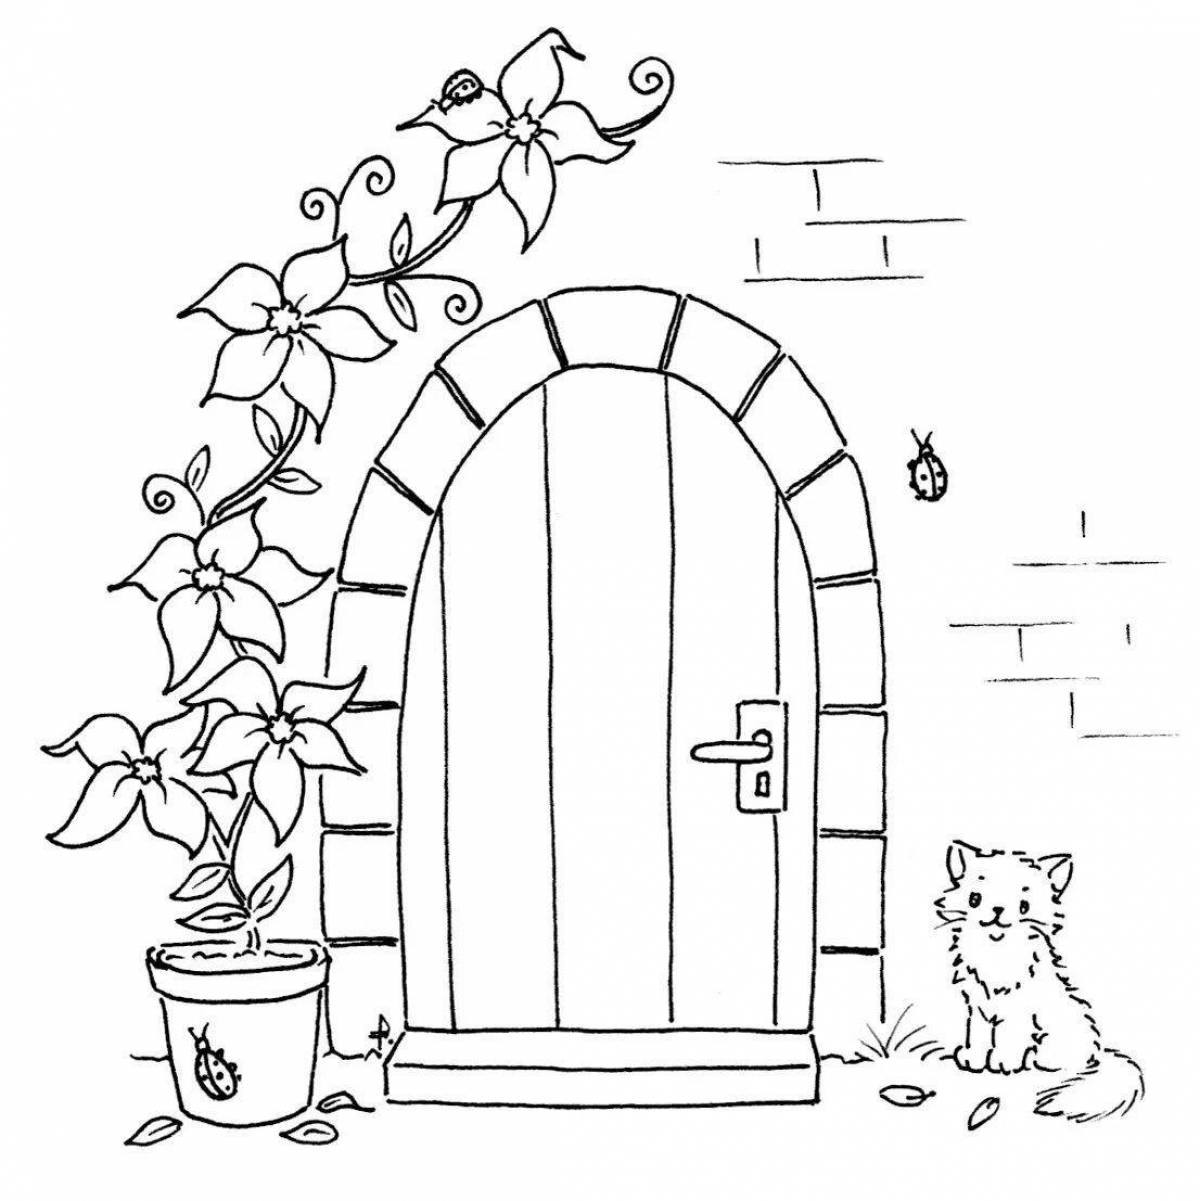 Joy window coloring page for kids